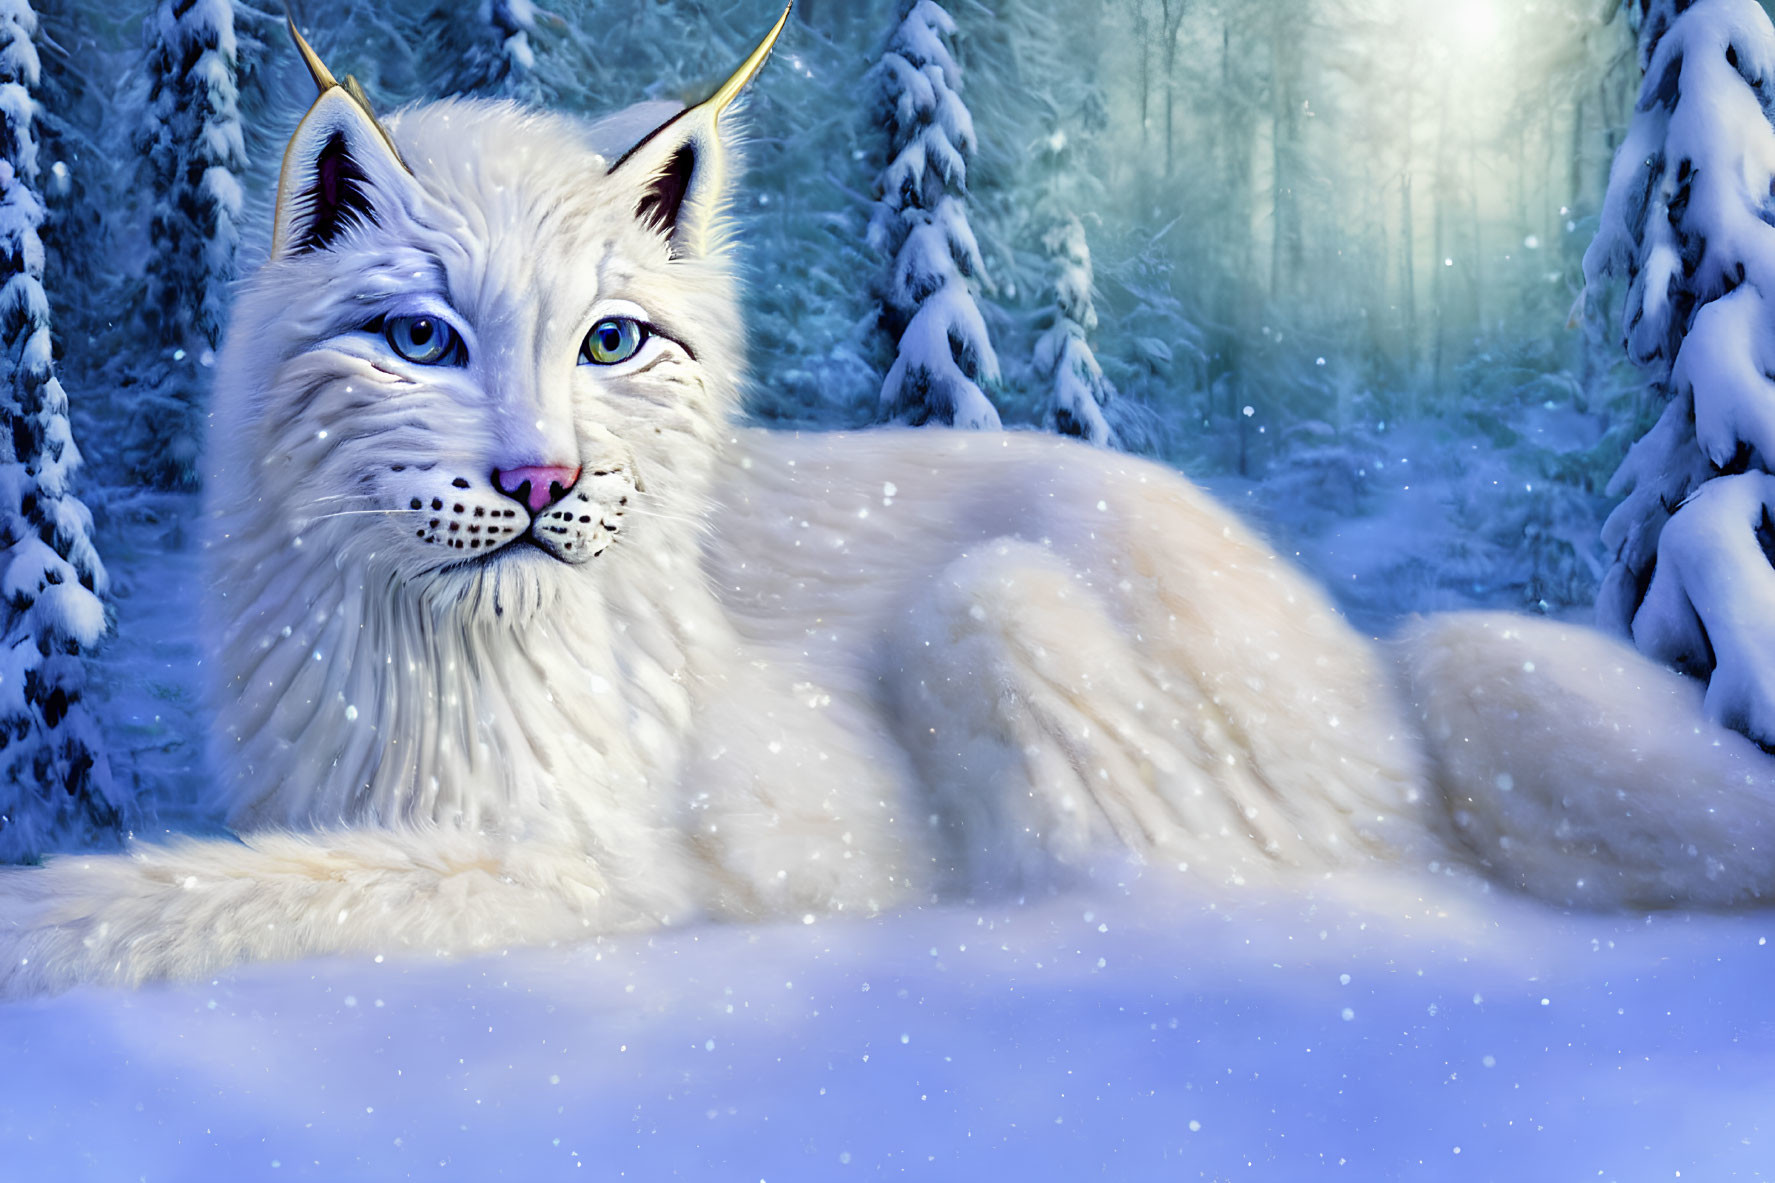 Majestic white lynx with blue eyes in snowy forest